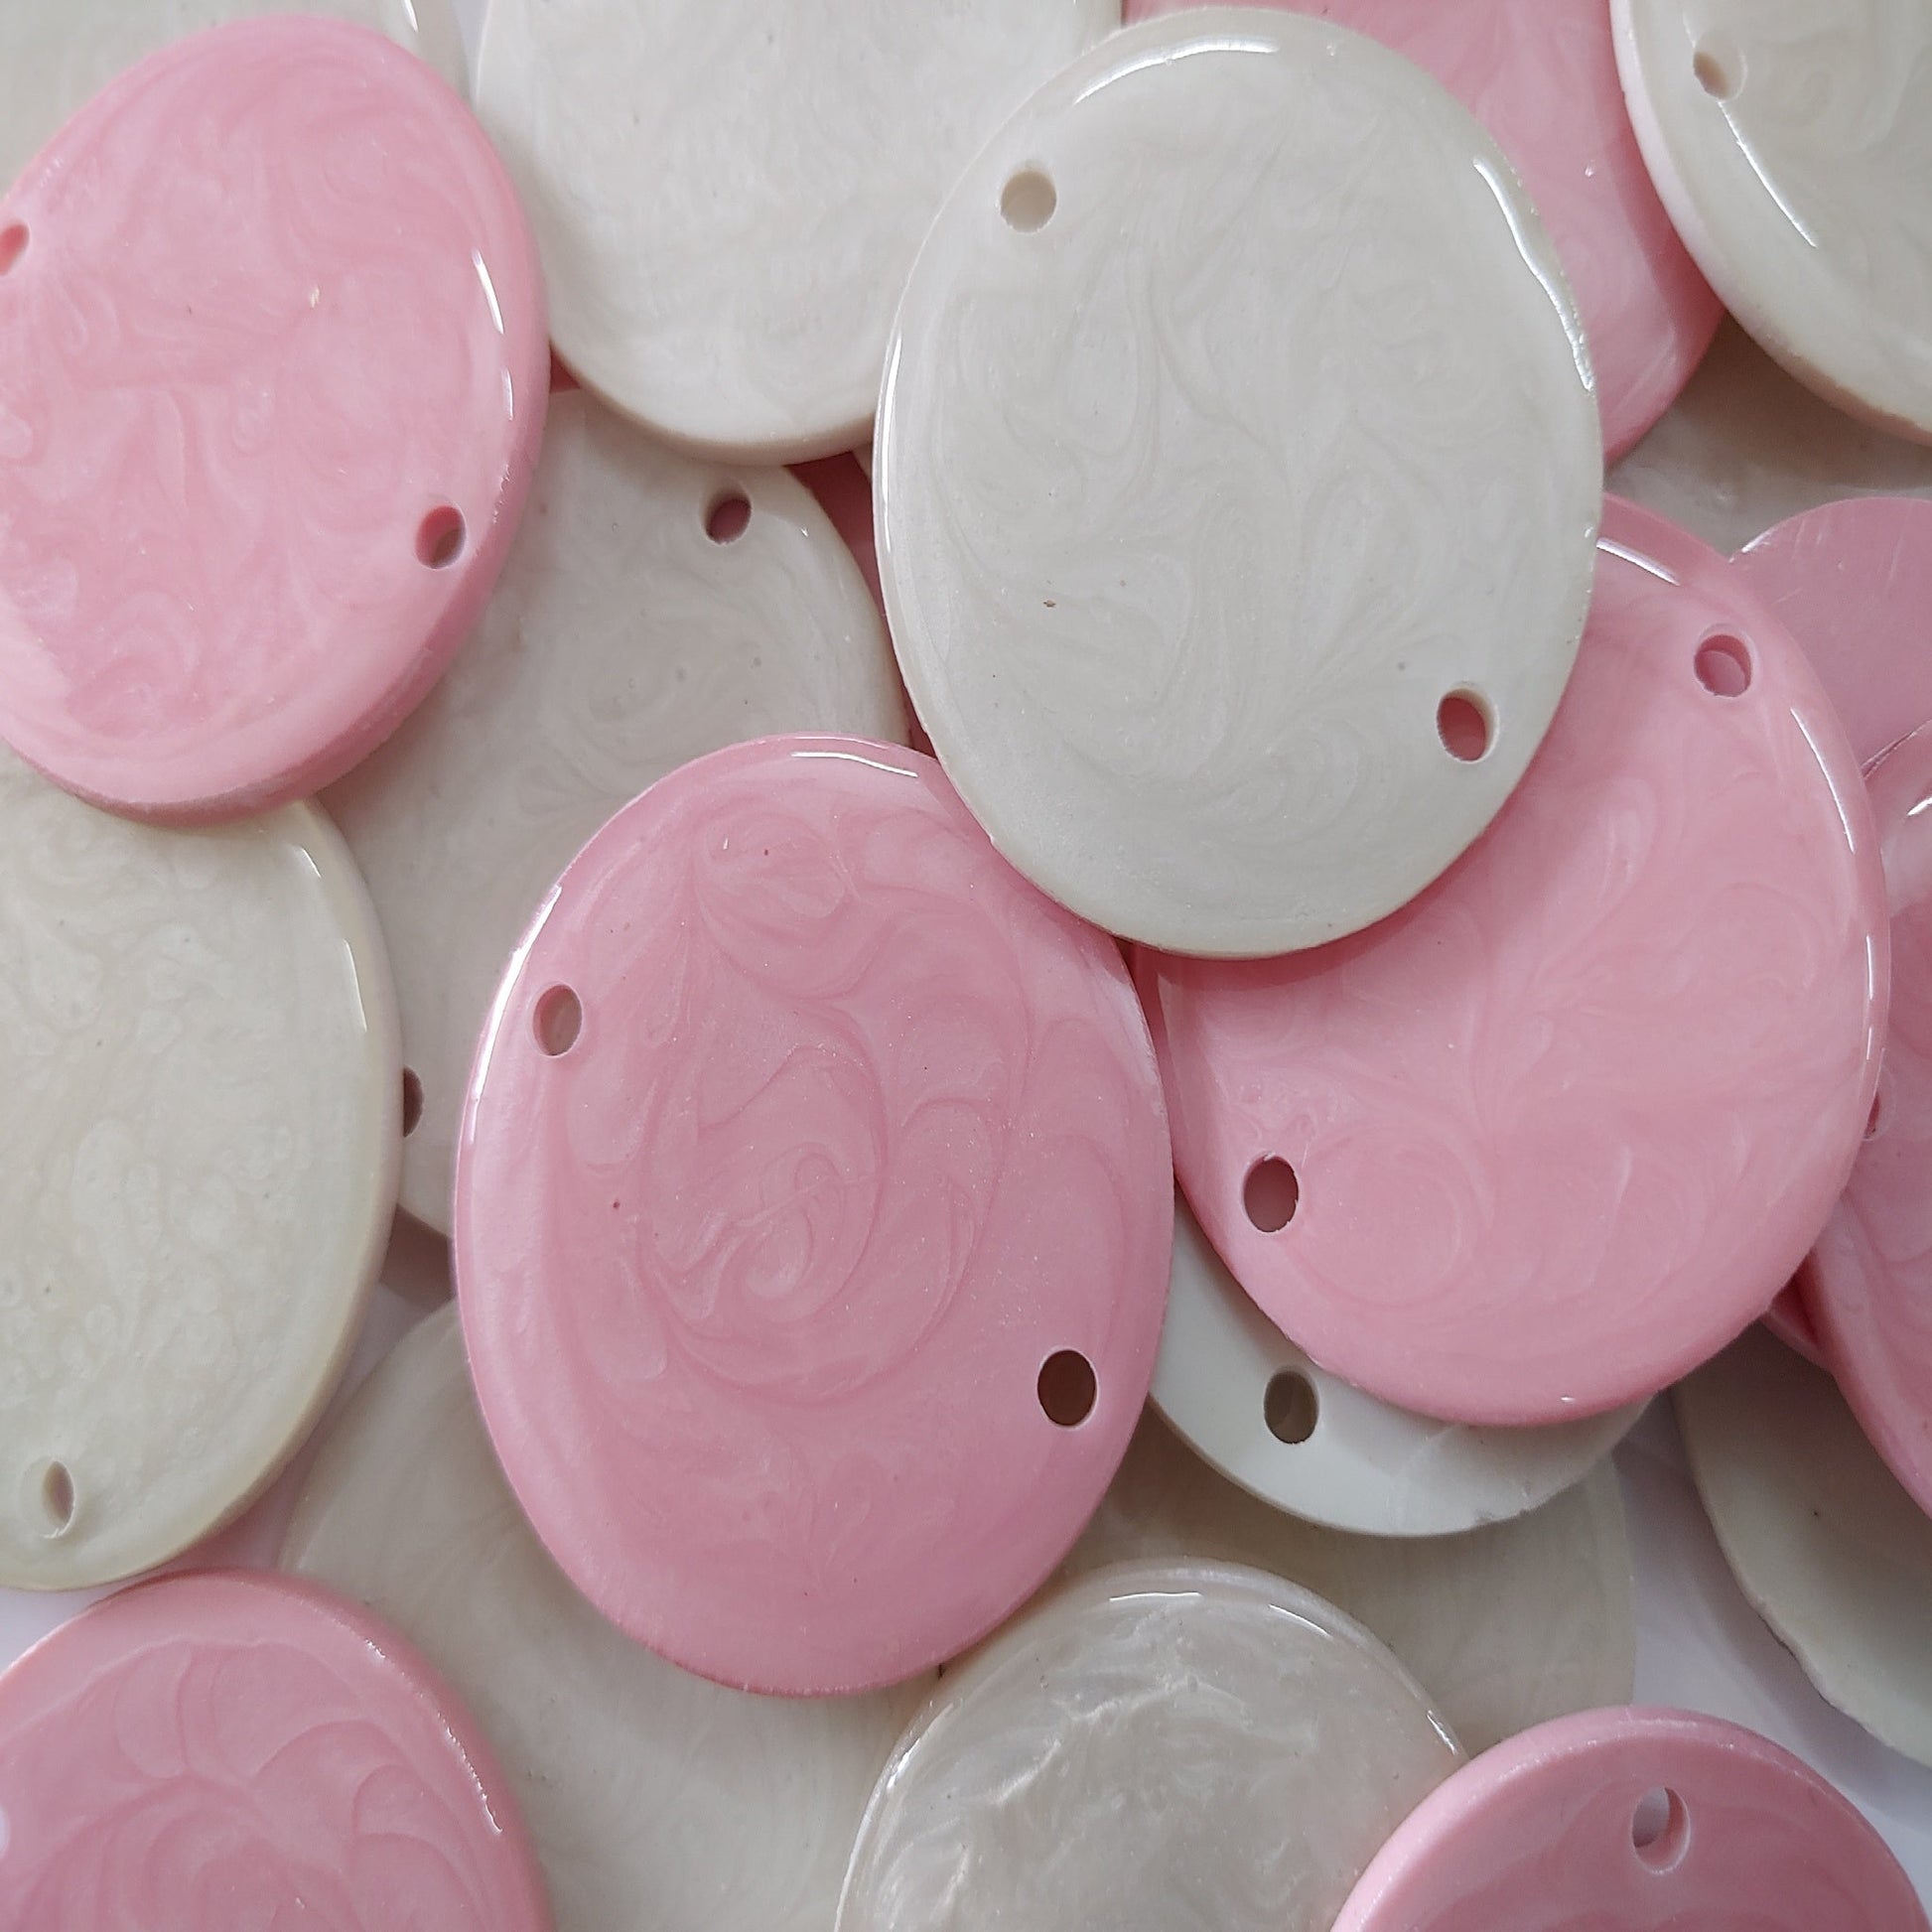 Indian Petals - Resin Round 45mm Discs with Hole at both ends suitable for Caft Jewelery making or Decor Resin Round 45mm Discs with Hole at both ends suitable for Caft Jewelery making or Decor - Pink / 50 Pcs